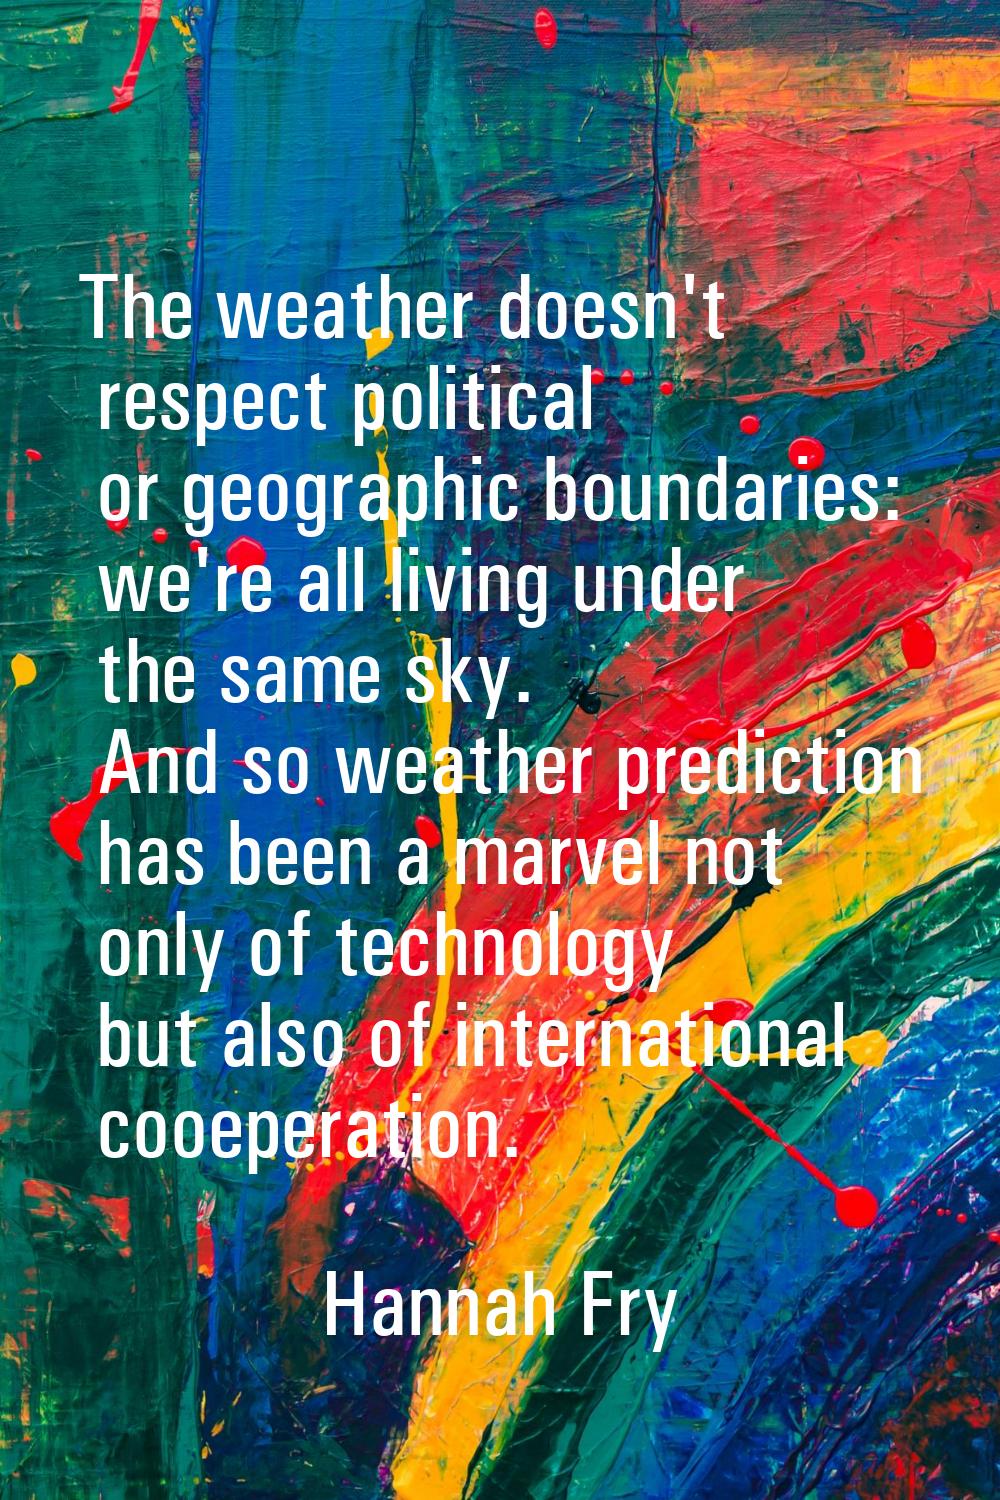 The weather doesn't respect political or geographic boundaries: we're all living under the same sky